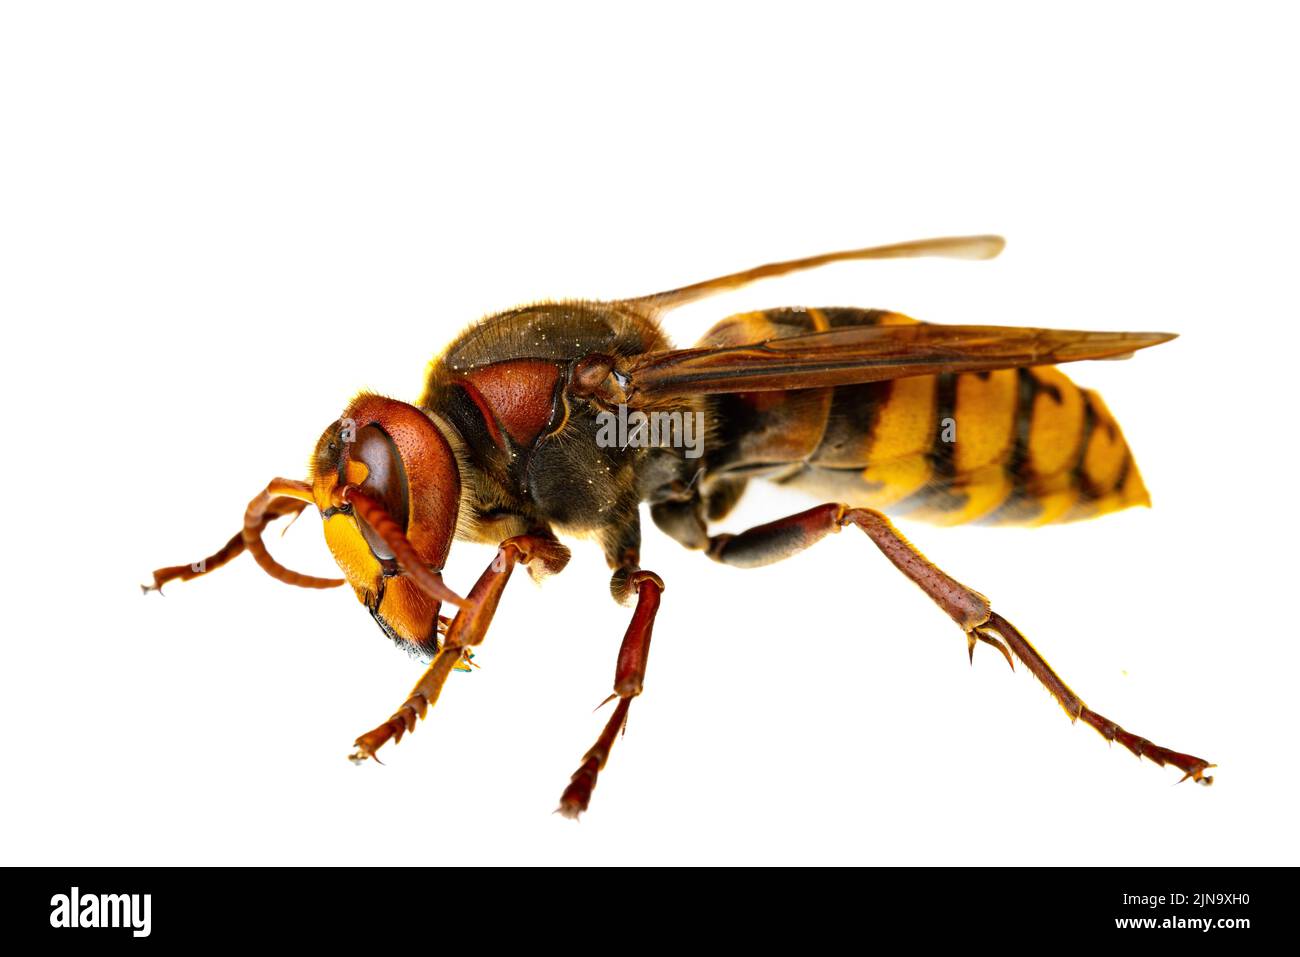 insects of europe - wasps: macro of  european hornet  ( Vespa crabro - Europäische Hornisse )  isolated on white background Stock Photo